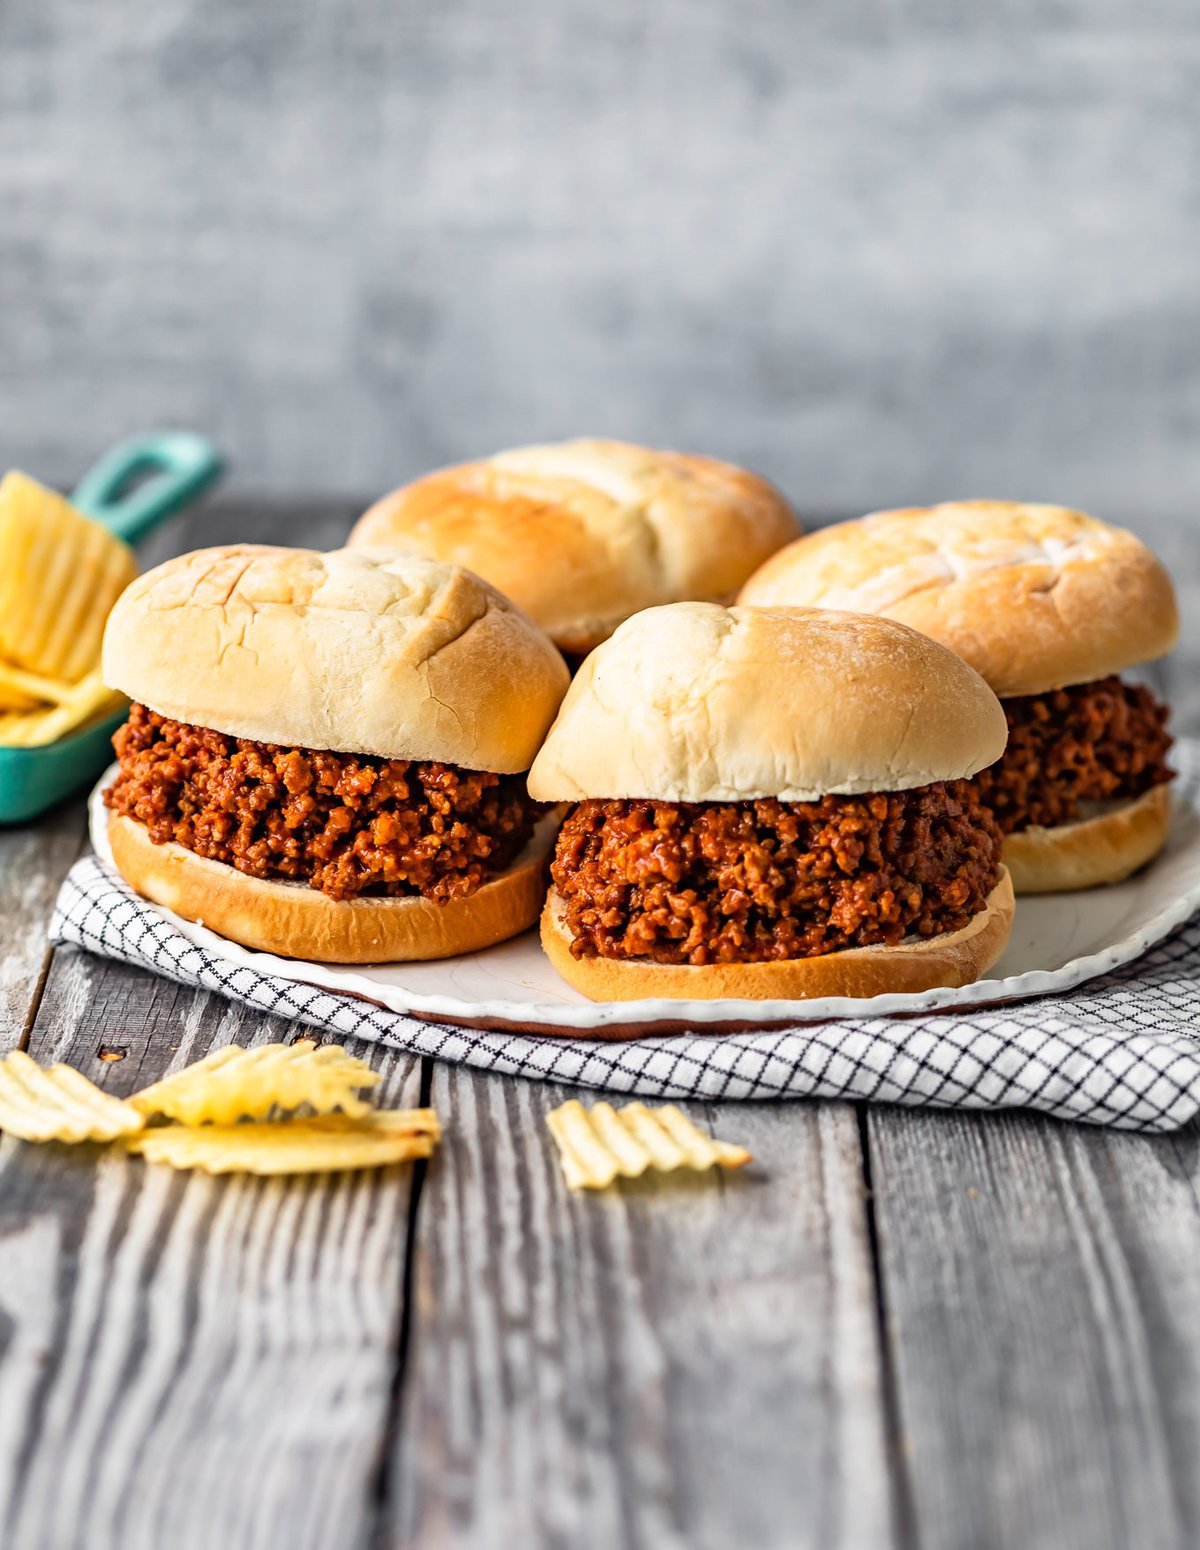 a plate of sloppy joes